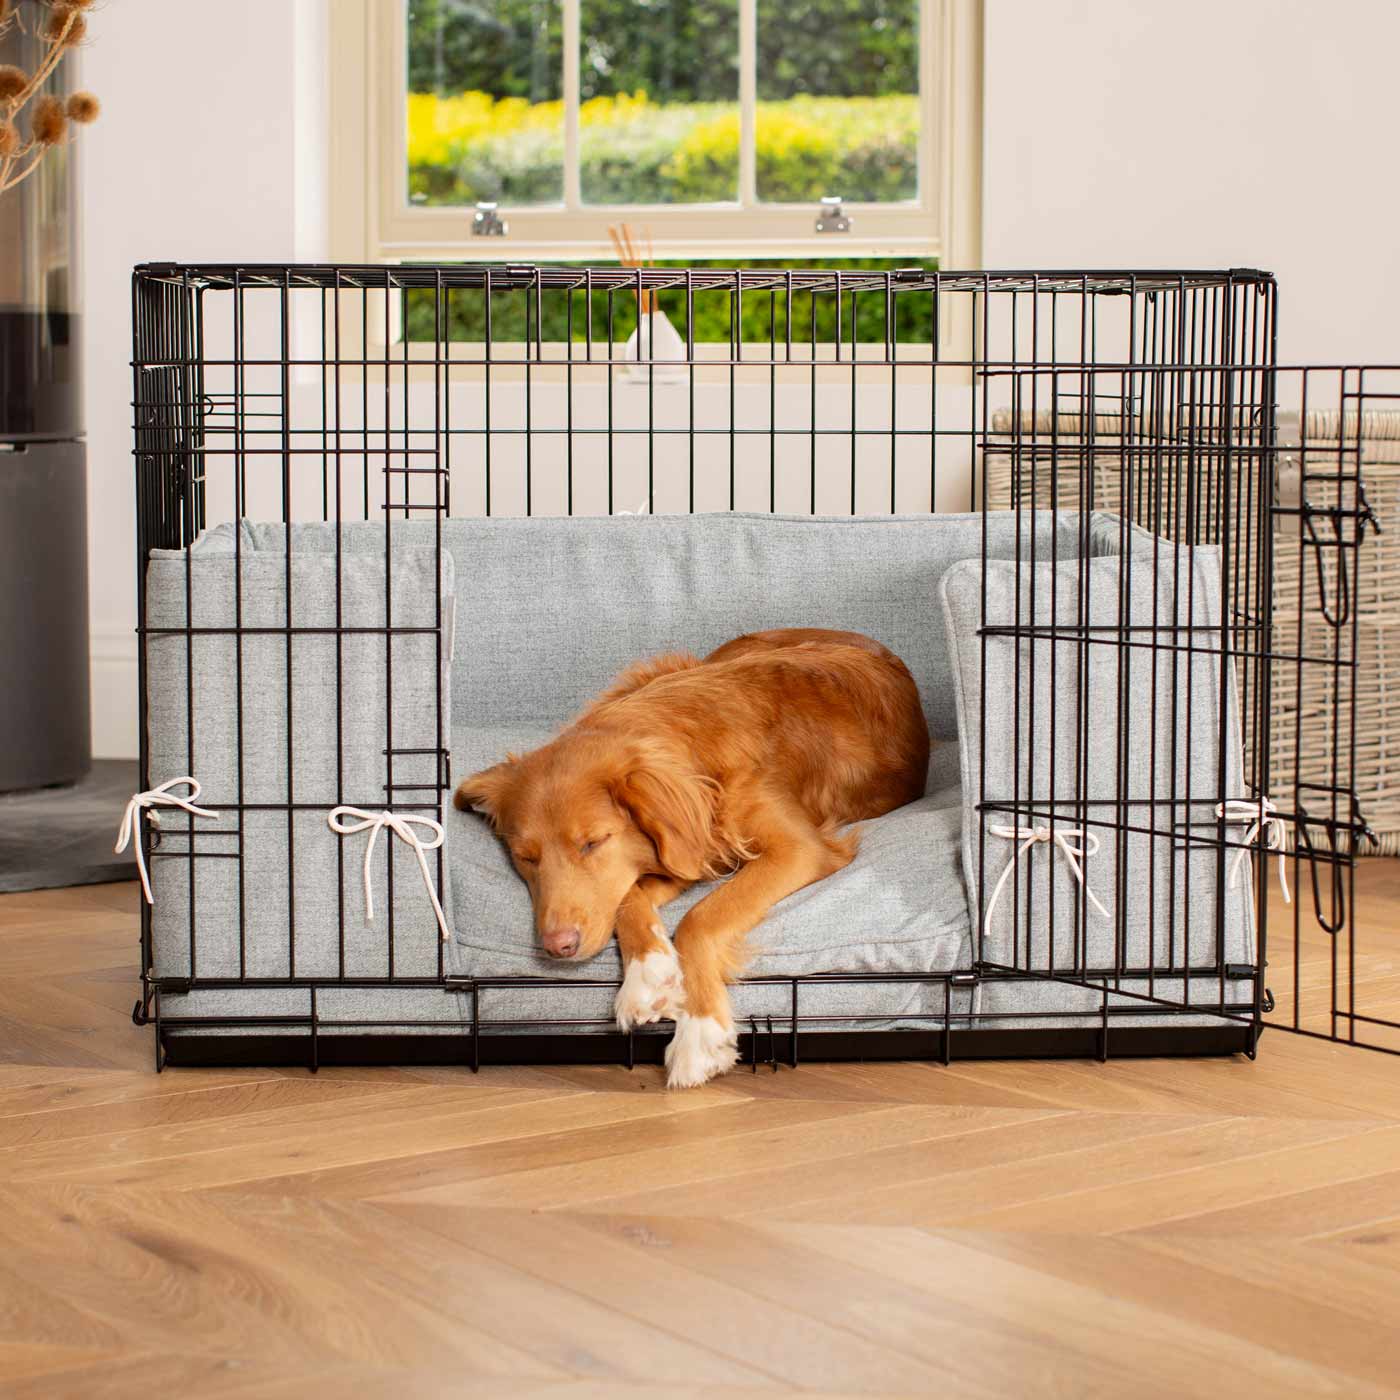 Luxury Dog Crate Bumper Cover, in Inchmurrin Iceberg, The Perfect Dog Bumper Spare Cover, Available Now at Lords & Labradors